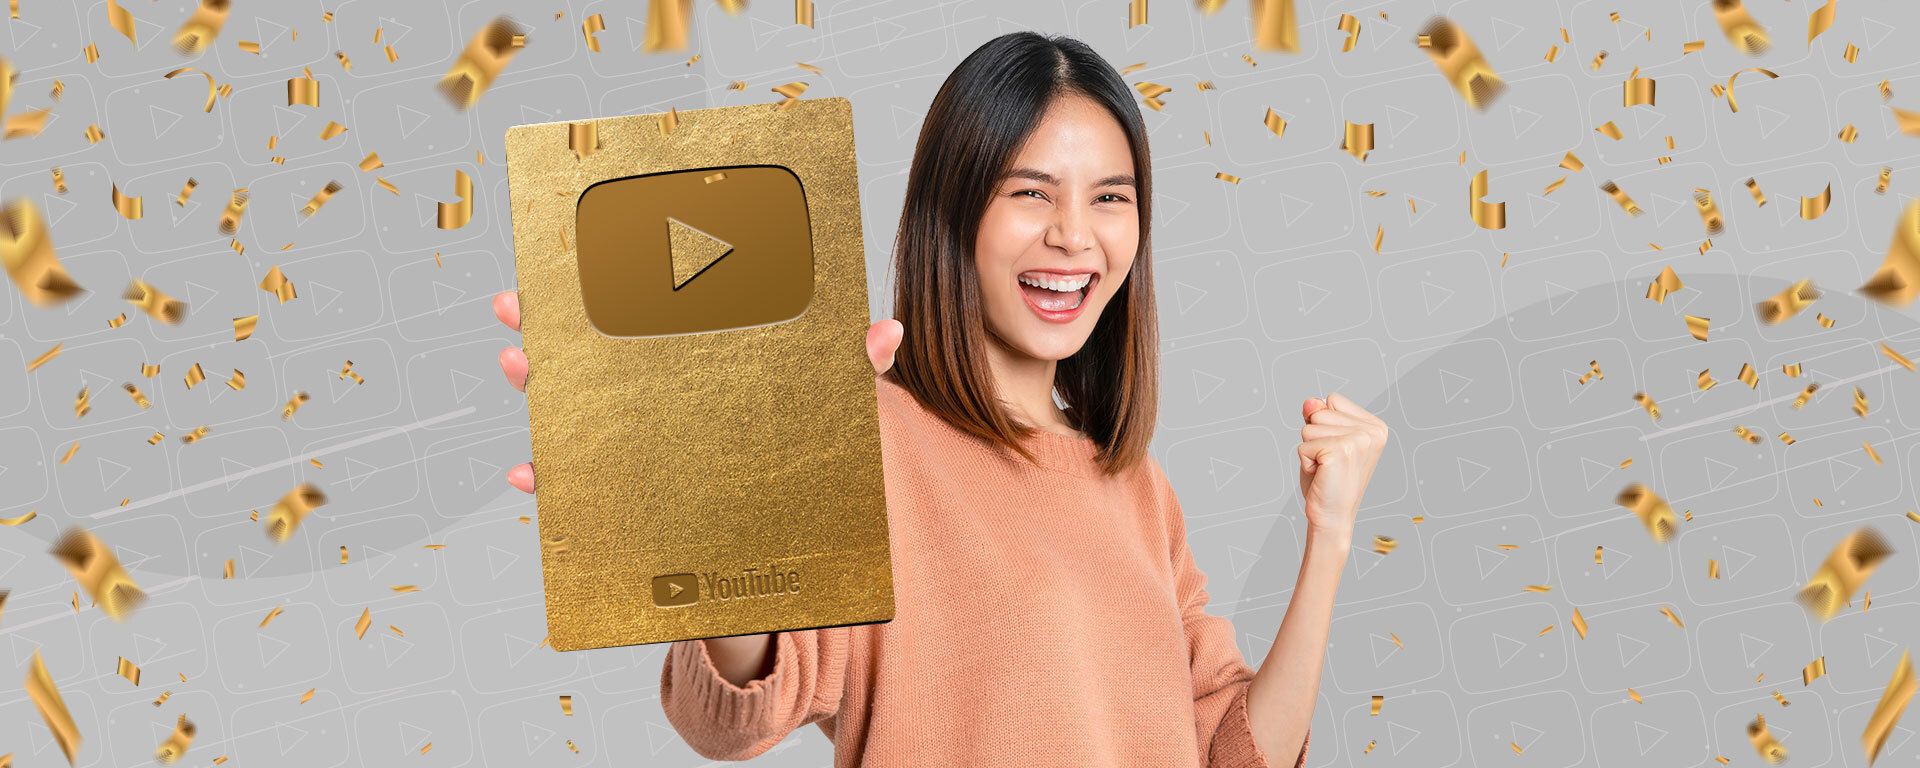 Image of a creator showing off her YouTube Creator Award.